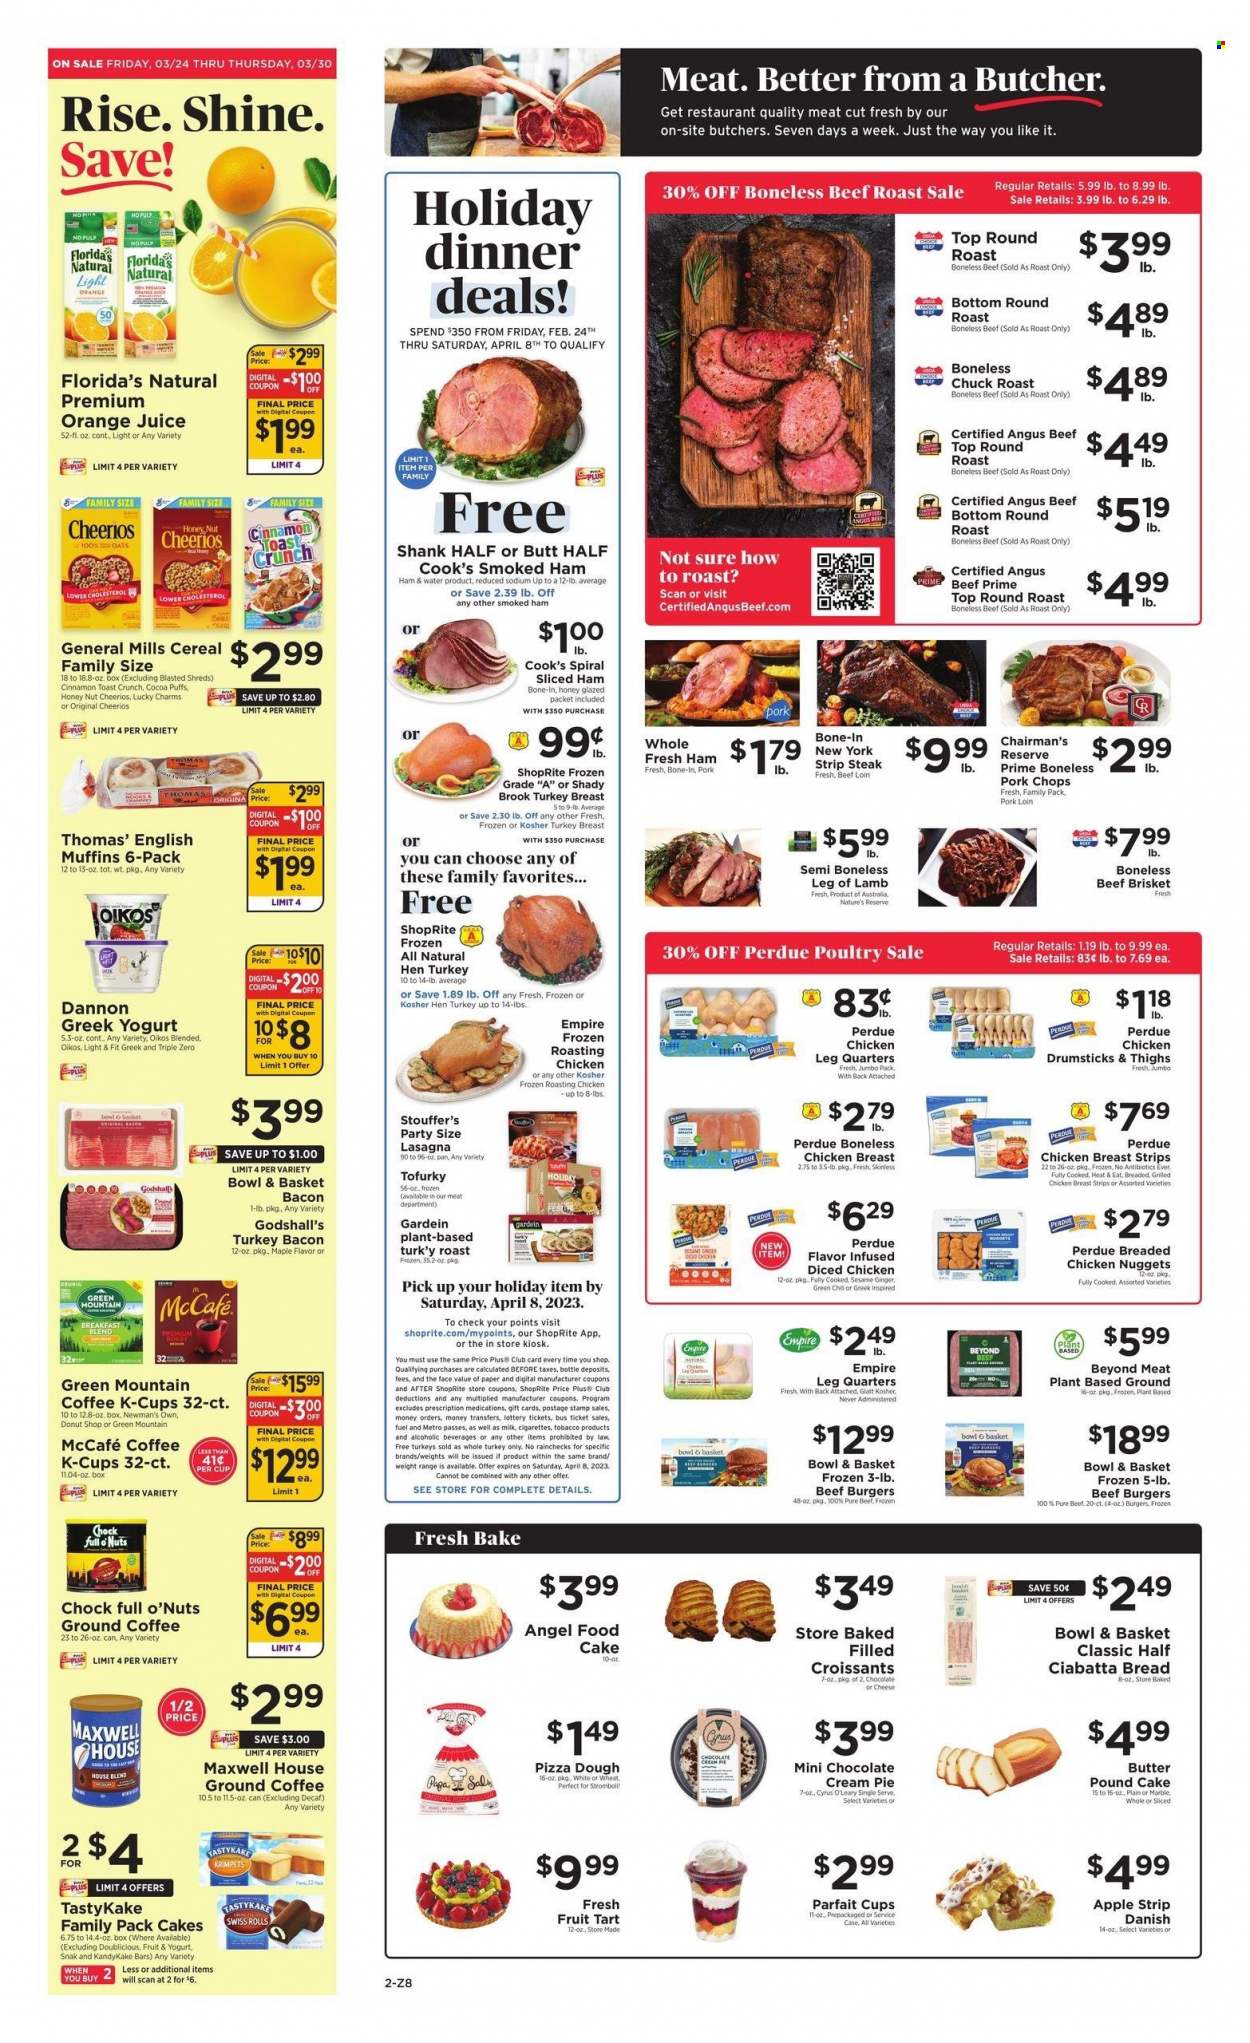 thumbnail - ShopRite Flyer - 03/24/2023 - 03/30/2023 - Sales products - bread, ciabatta, english muffins, cake, pie, tart, croissant, Bowl & Basket, puffs, Angel Food, cream pie, pound cake, fruit tart, ginger, chicken roast, nuggets, hamburger, fried chicken, chicken nuggets, beef burger, lasagna meal, Perdue®, brisket, roast, bacon, turkey bacon, ham, smoked ham, Cook's, greek yoghurt, yoghurt, Oikos, Dannon, milk, pizza dough, strips, Stouffer's, Florida's Natural, cereals, Cheerios, cinnamon, orange juice, juice, water, Maxwell House, coffee, ground coffee, coffee capsules, McCafe, K-Cups, Green Mountain, turkey breast, whole turkey, chicken breasts, chicken legs, chicken drumsticks, chicken, beef meat, steak, round roast, roast beef, chuck roast, striploin steak, beef brisket, pork chops, pork loin, pork meat, lamb leg, Sure, pan, paper. Page 2.